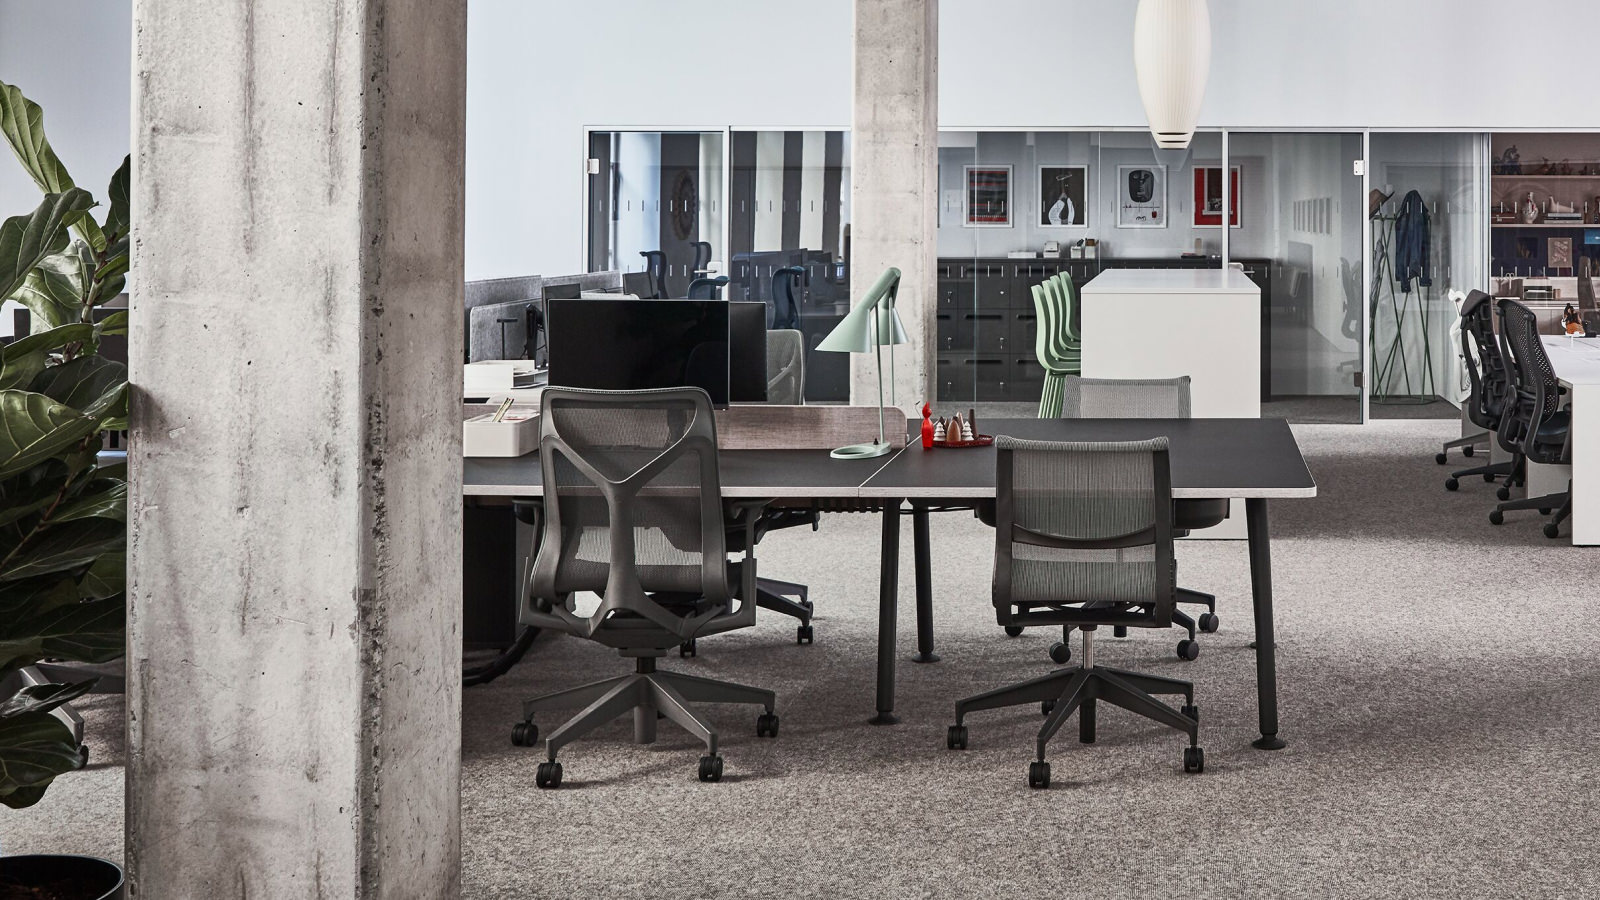 A workspace within the Paris showroom, featuring Setu and Cosm Chairs around a black Memo Desk.